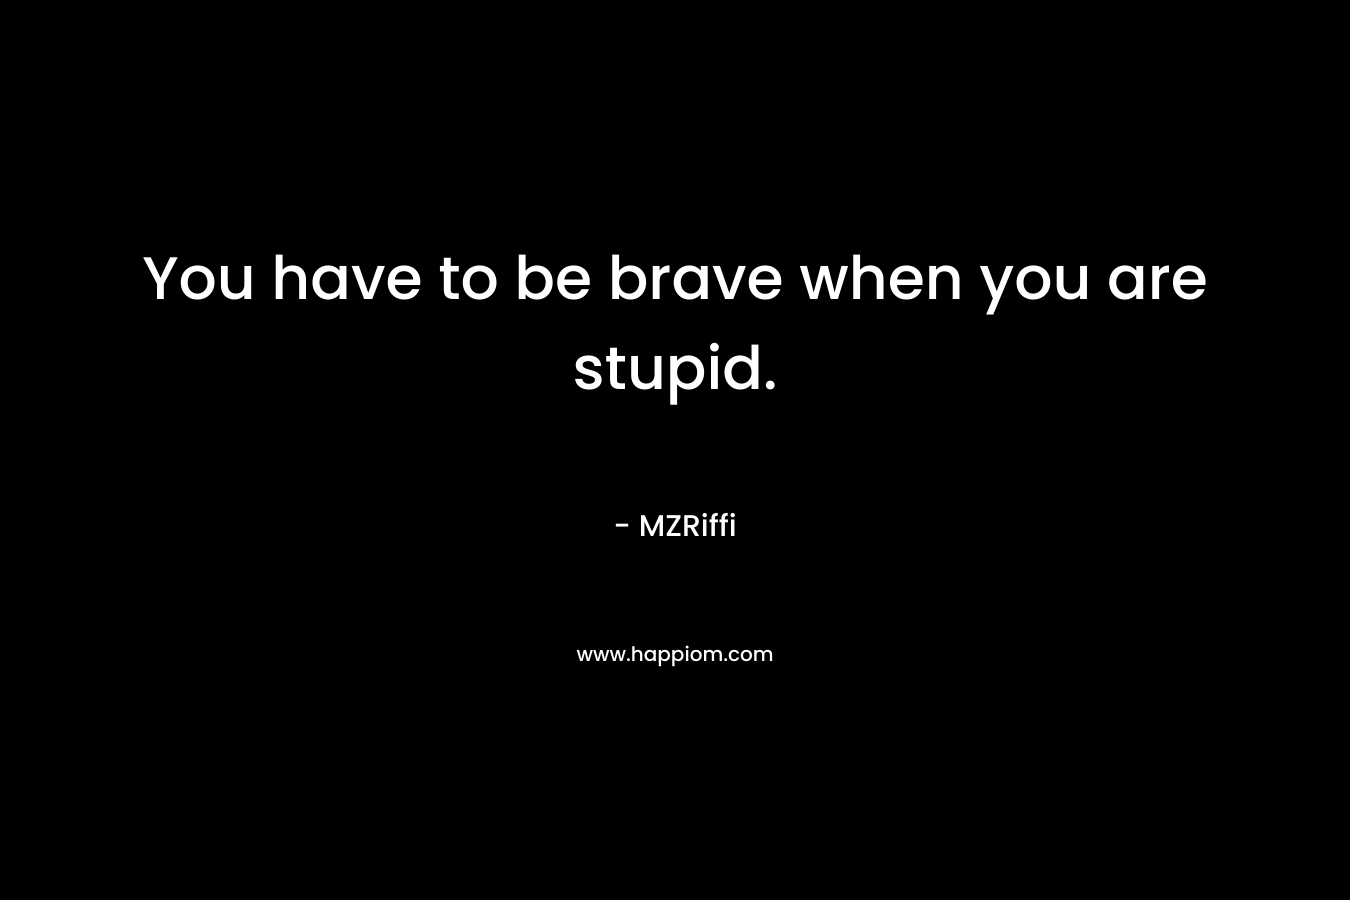 You have to be brave when you are stupid. – MZRiffi